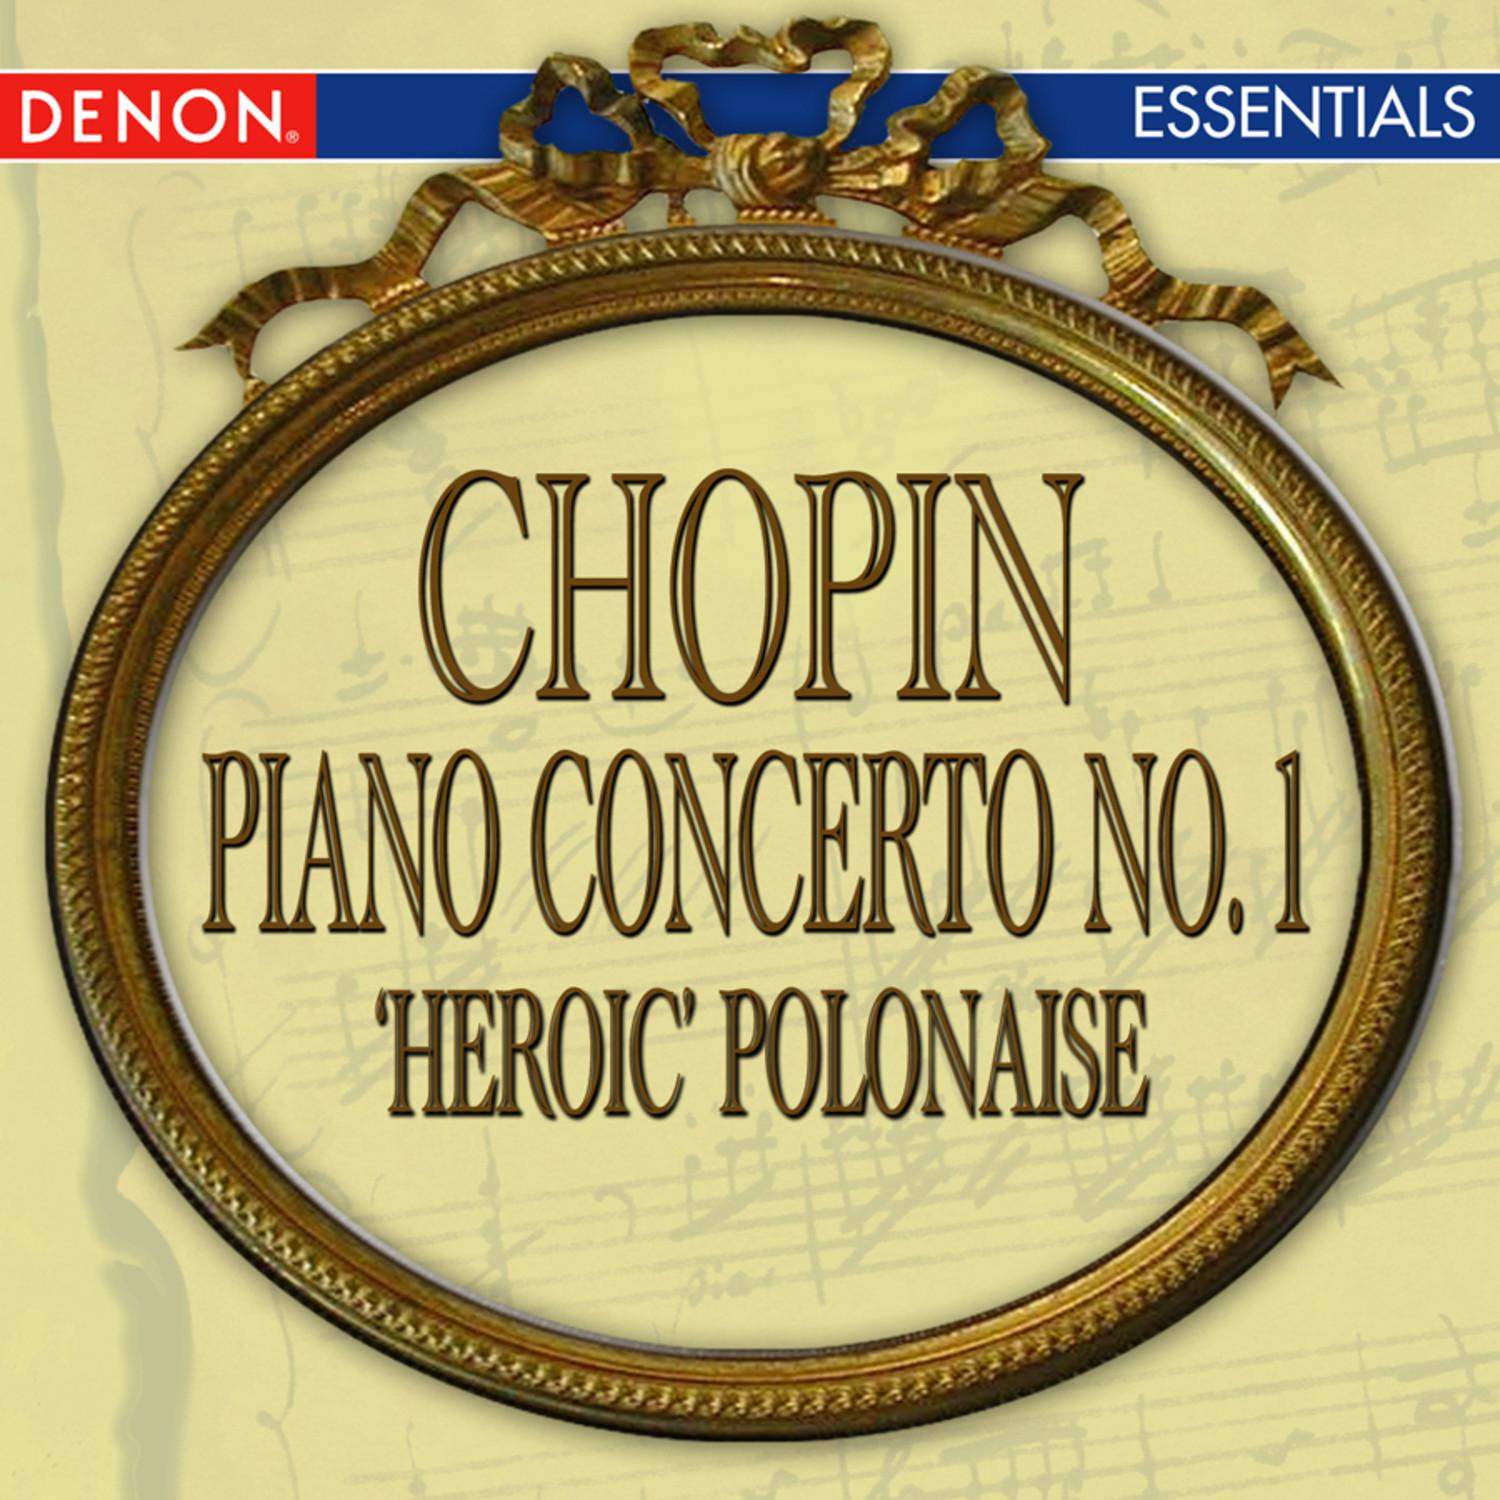 Polonaise No. 6 in A-Flat Major, Op. 53 "Heroic"